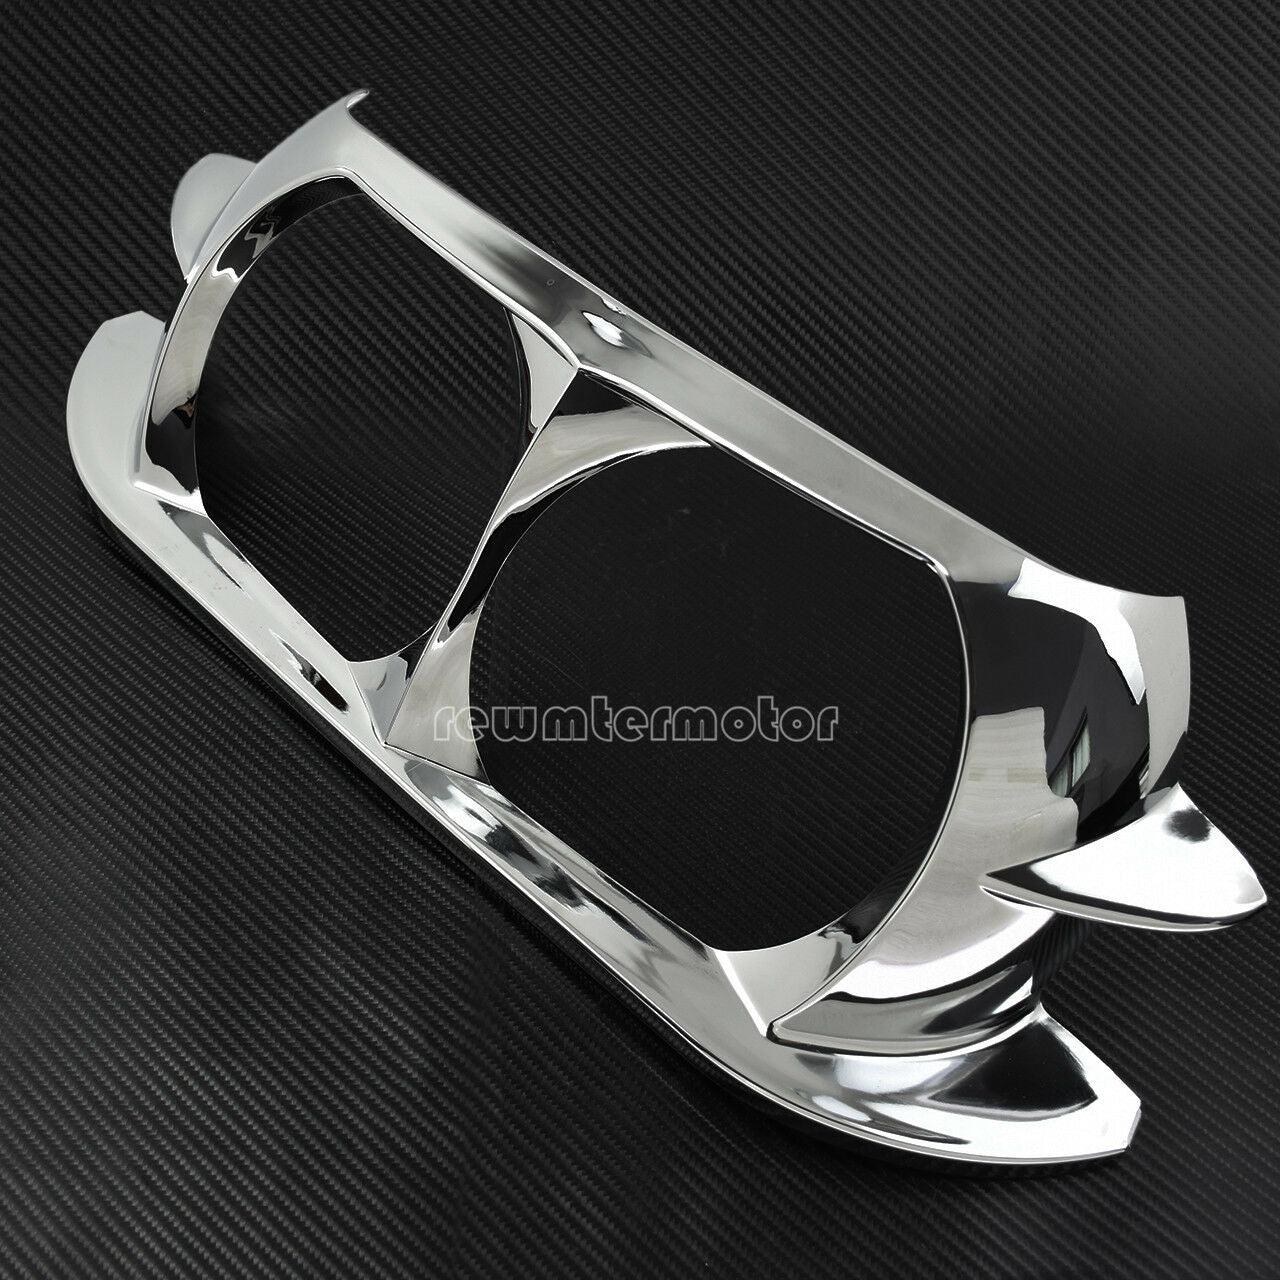 Chrome Headlamp Headlight Trim Cover Bezel Fit For Touring Road Glide 2015-2020 - Moto Life Products